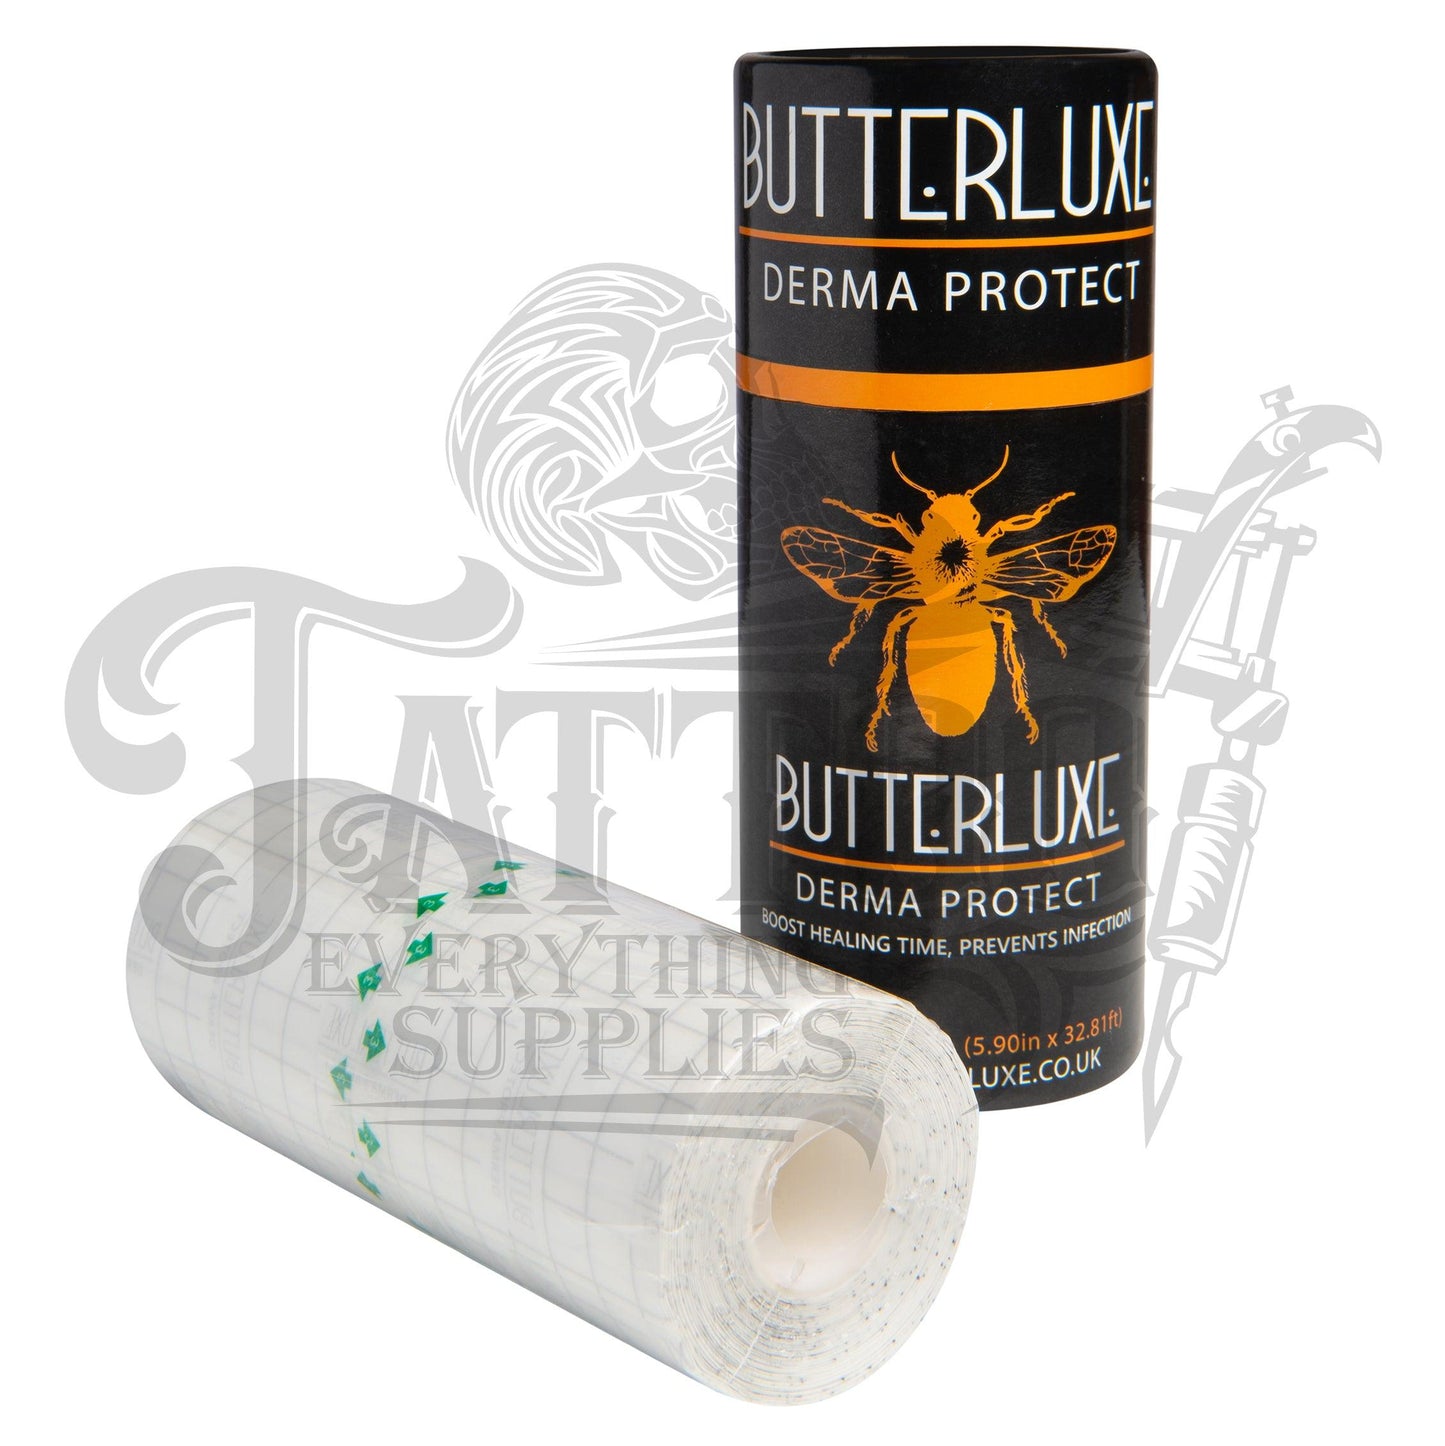 Butterluxe Derma Protective Film - Tattoo Everything Supplies